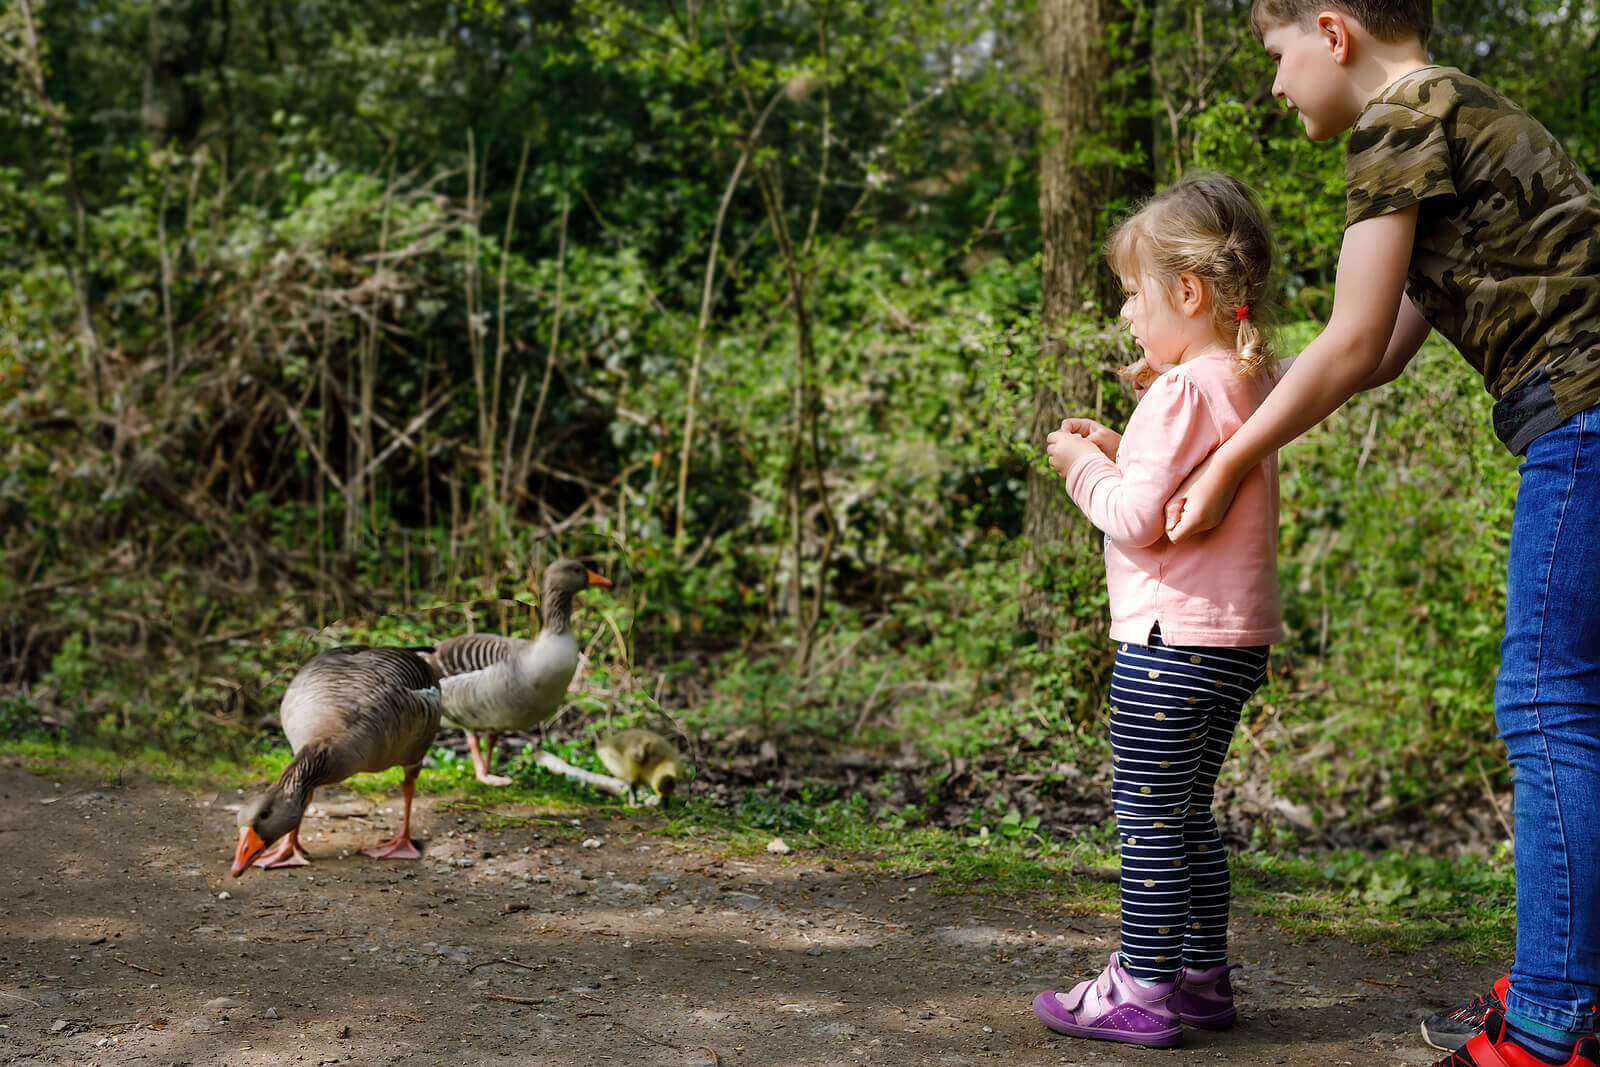 My Child Is Afraid of Birds: What Do I Do?